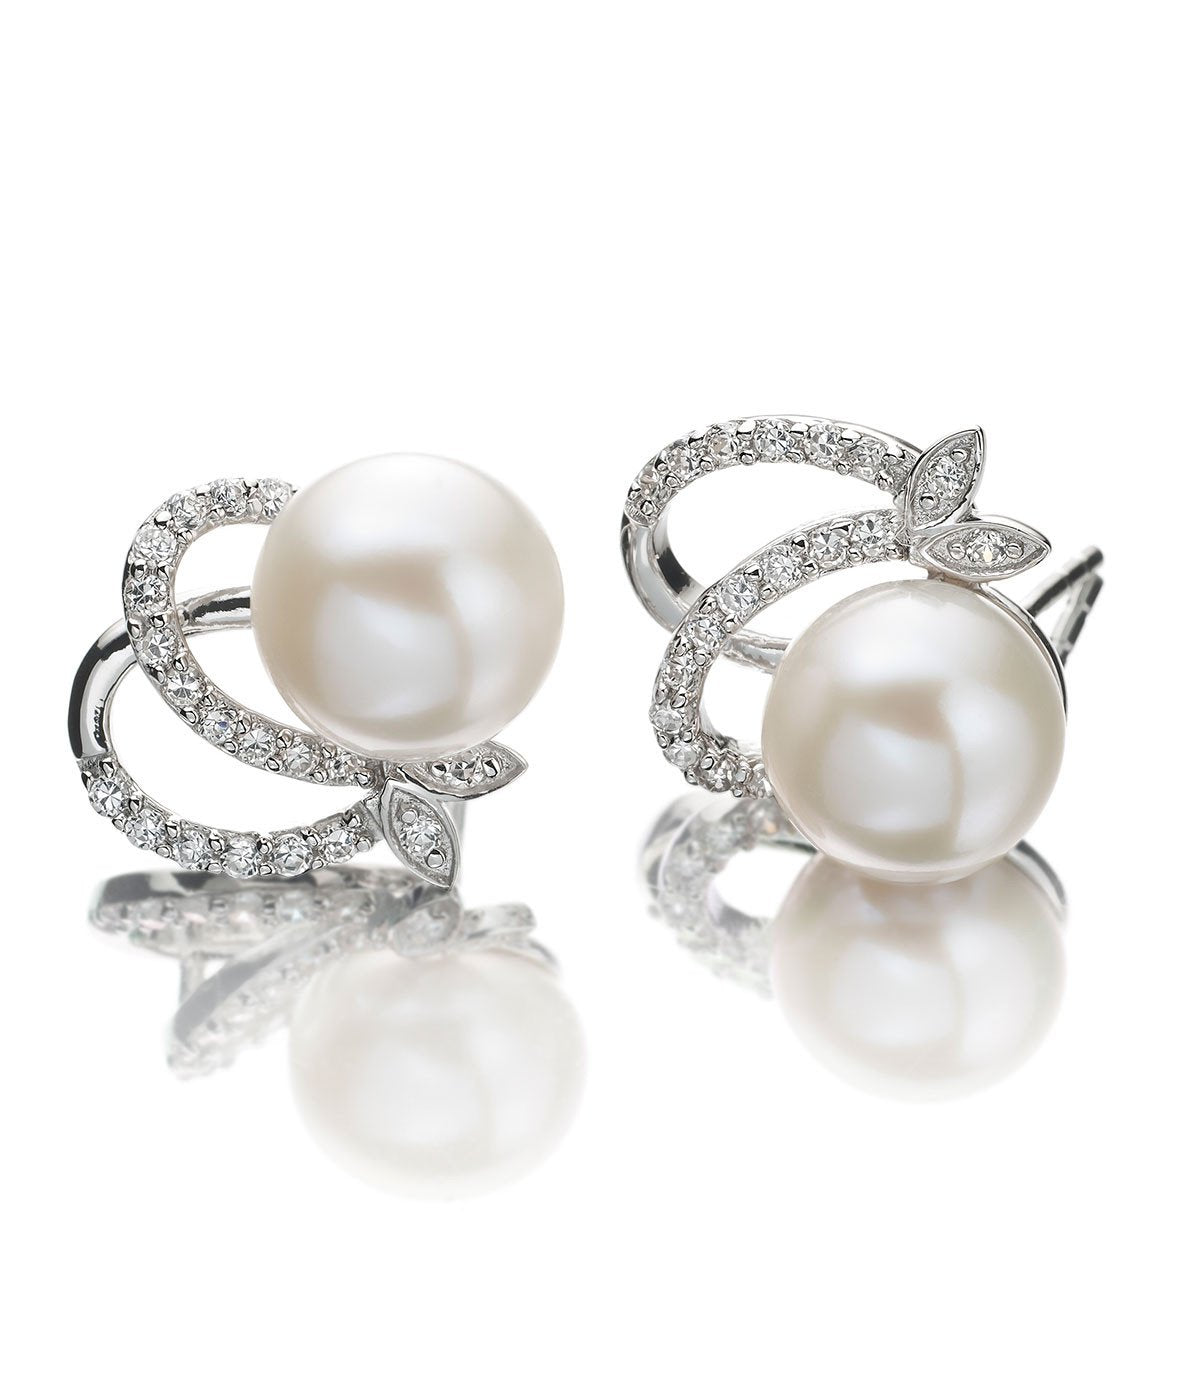 Callista Pearl Stud Earrings in Sterling Silver with Rhodium Plating and Cubic Zirconia